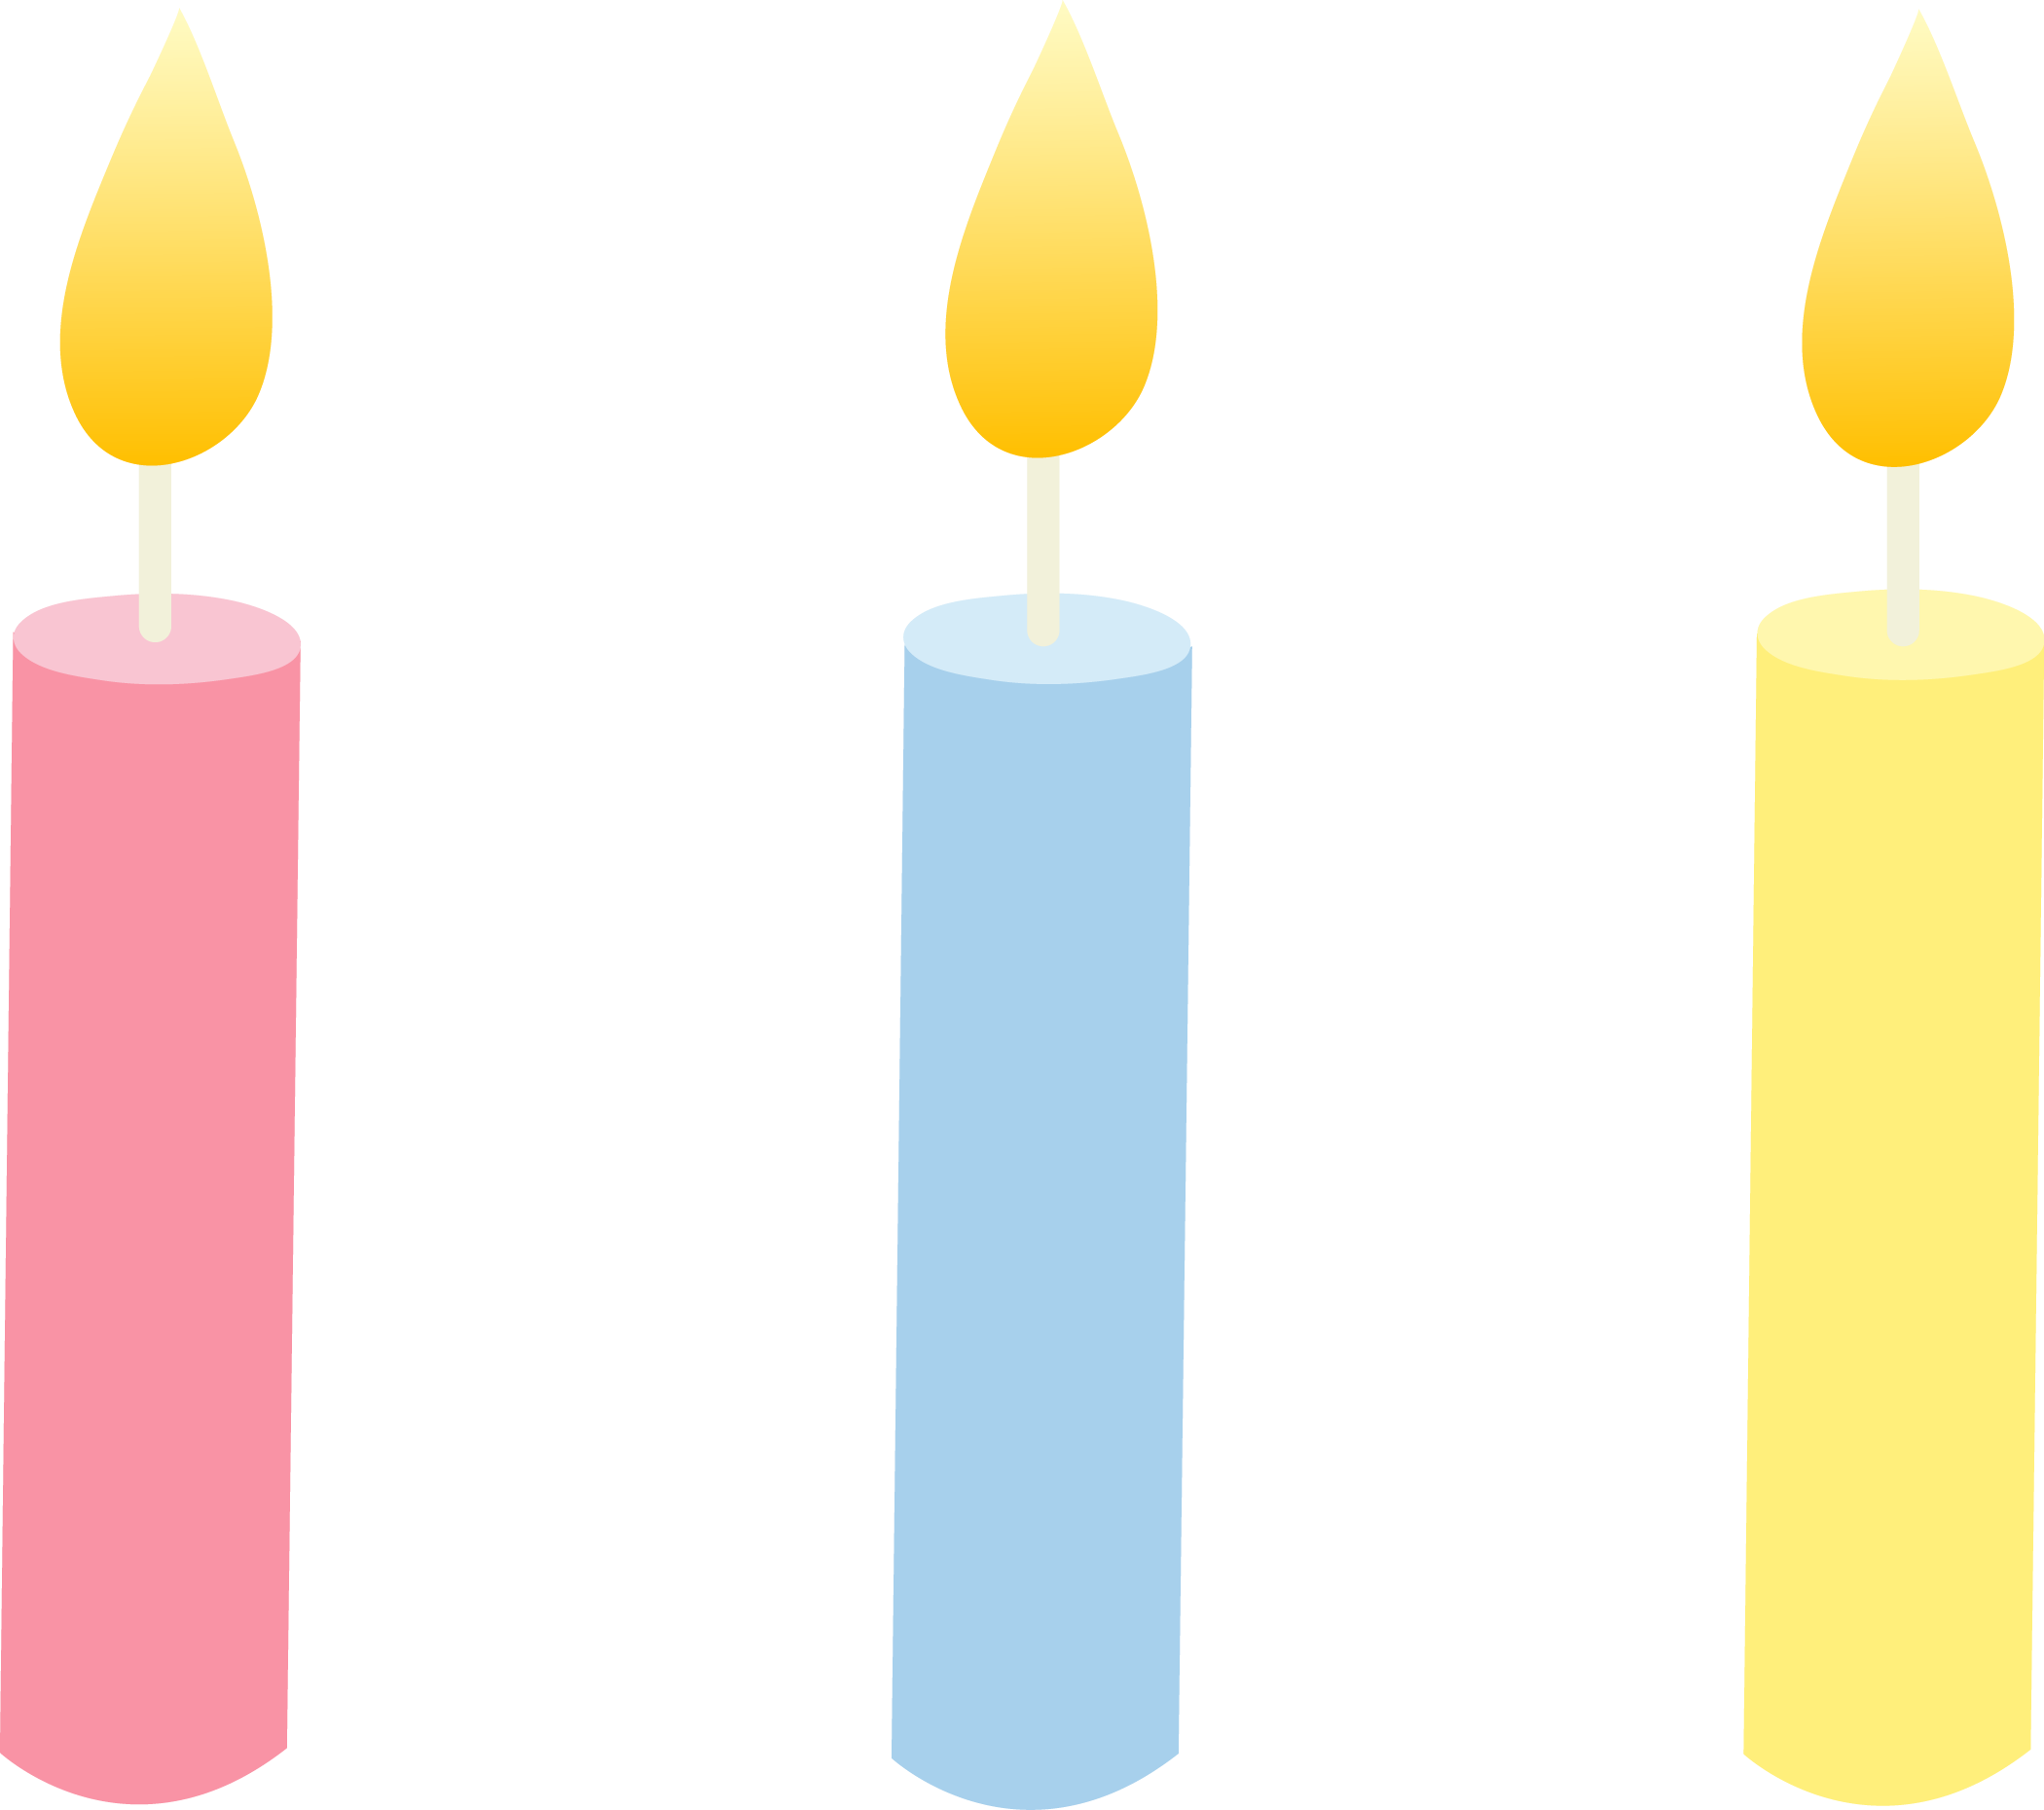 Three Pastel Colored Birthday Candles - Free Clip Art